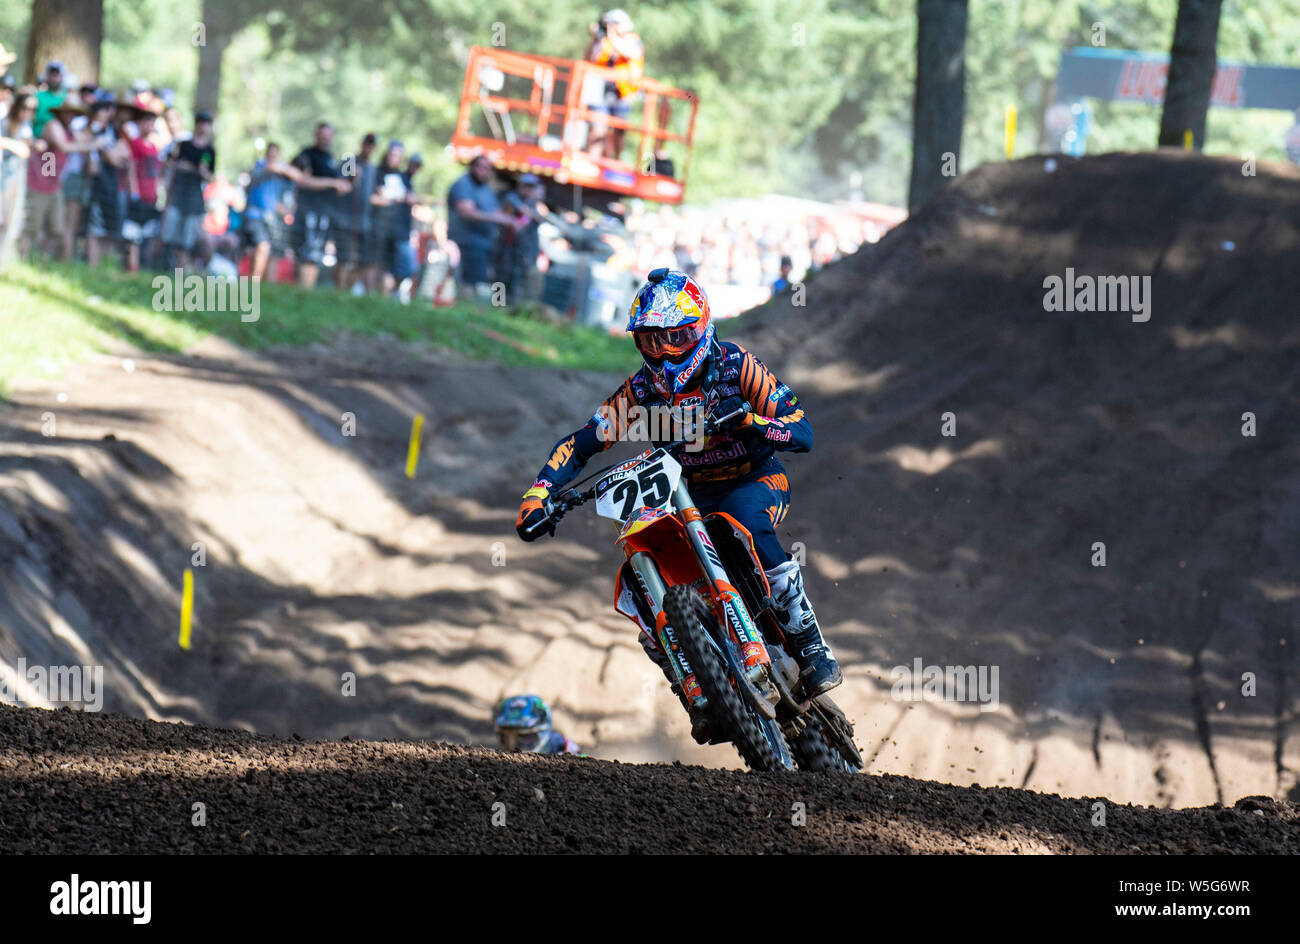 Washougal, WA USA. 27th July, 2019. # 25 Marvin Musqin coming out of section 16 section during the Lucas Oil Pro Motocross Washougal National 450 class championship at Washougal MX park Washougal, WA Thurman James/CSM/Alamy Live News Stock Photo